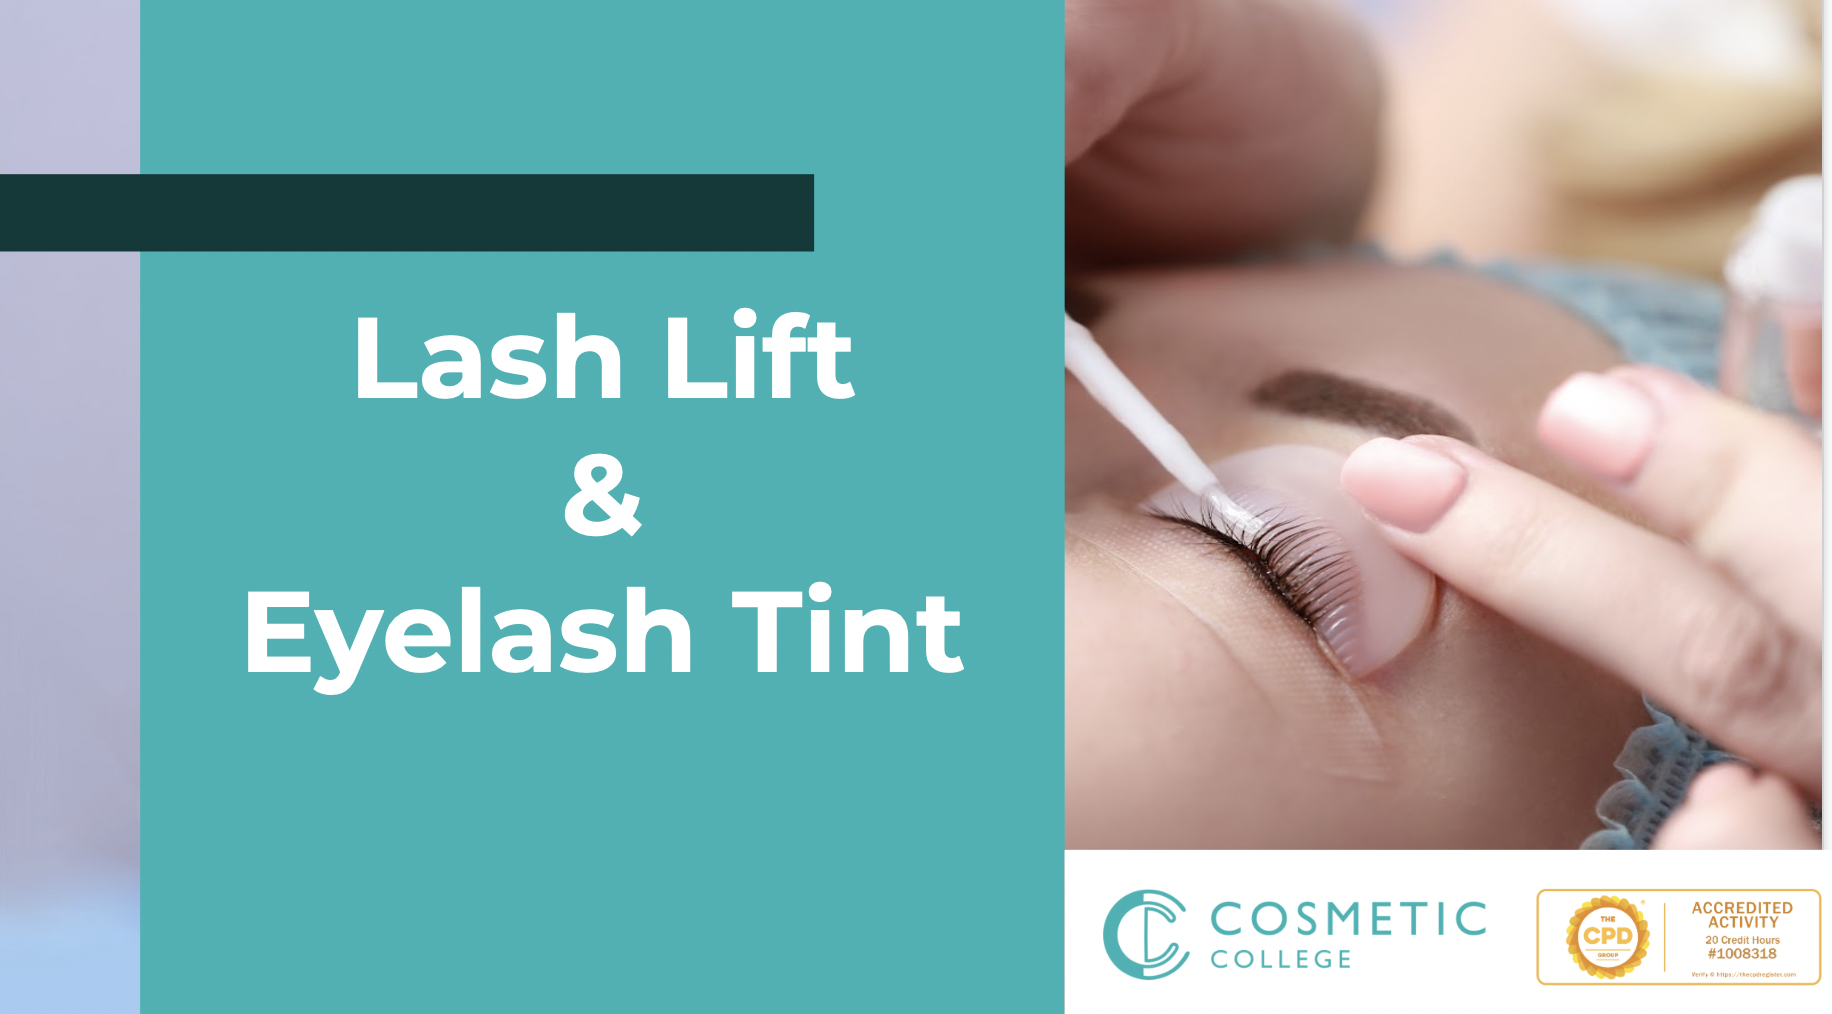 Lash Lift Training At The Cosmetic College